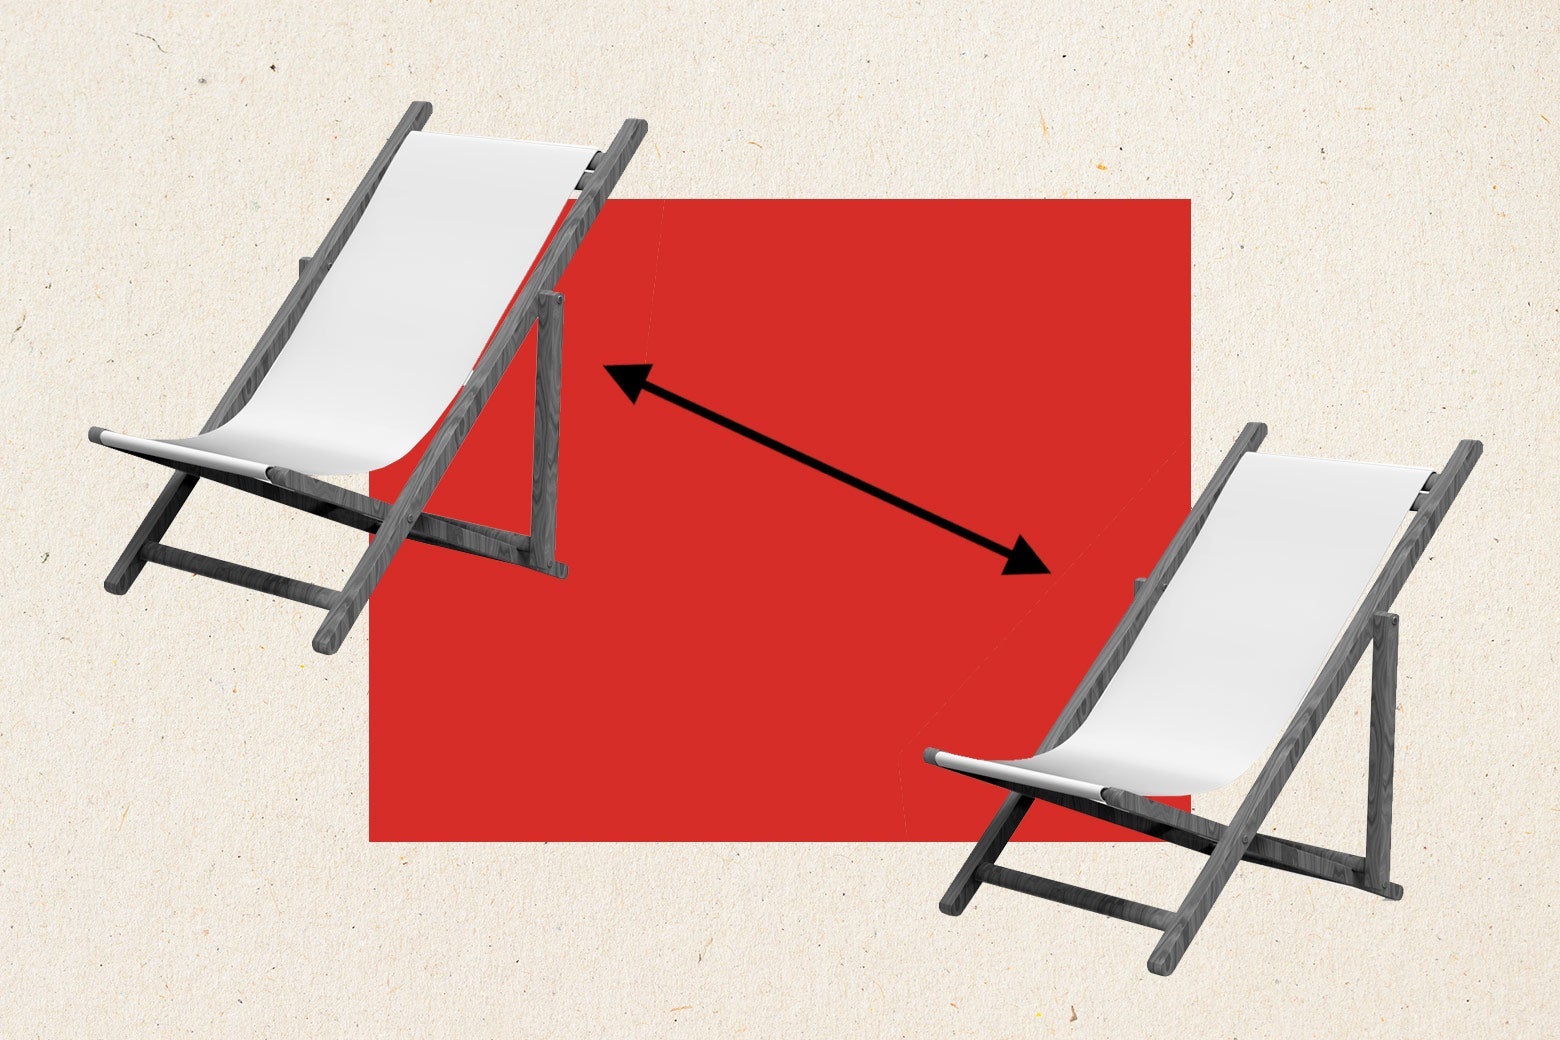 Two lounger chairs with an arrow between them indicating social distancing